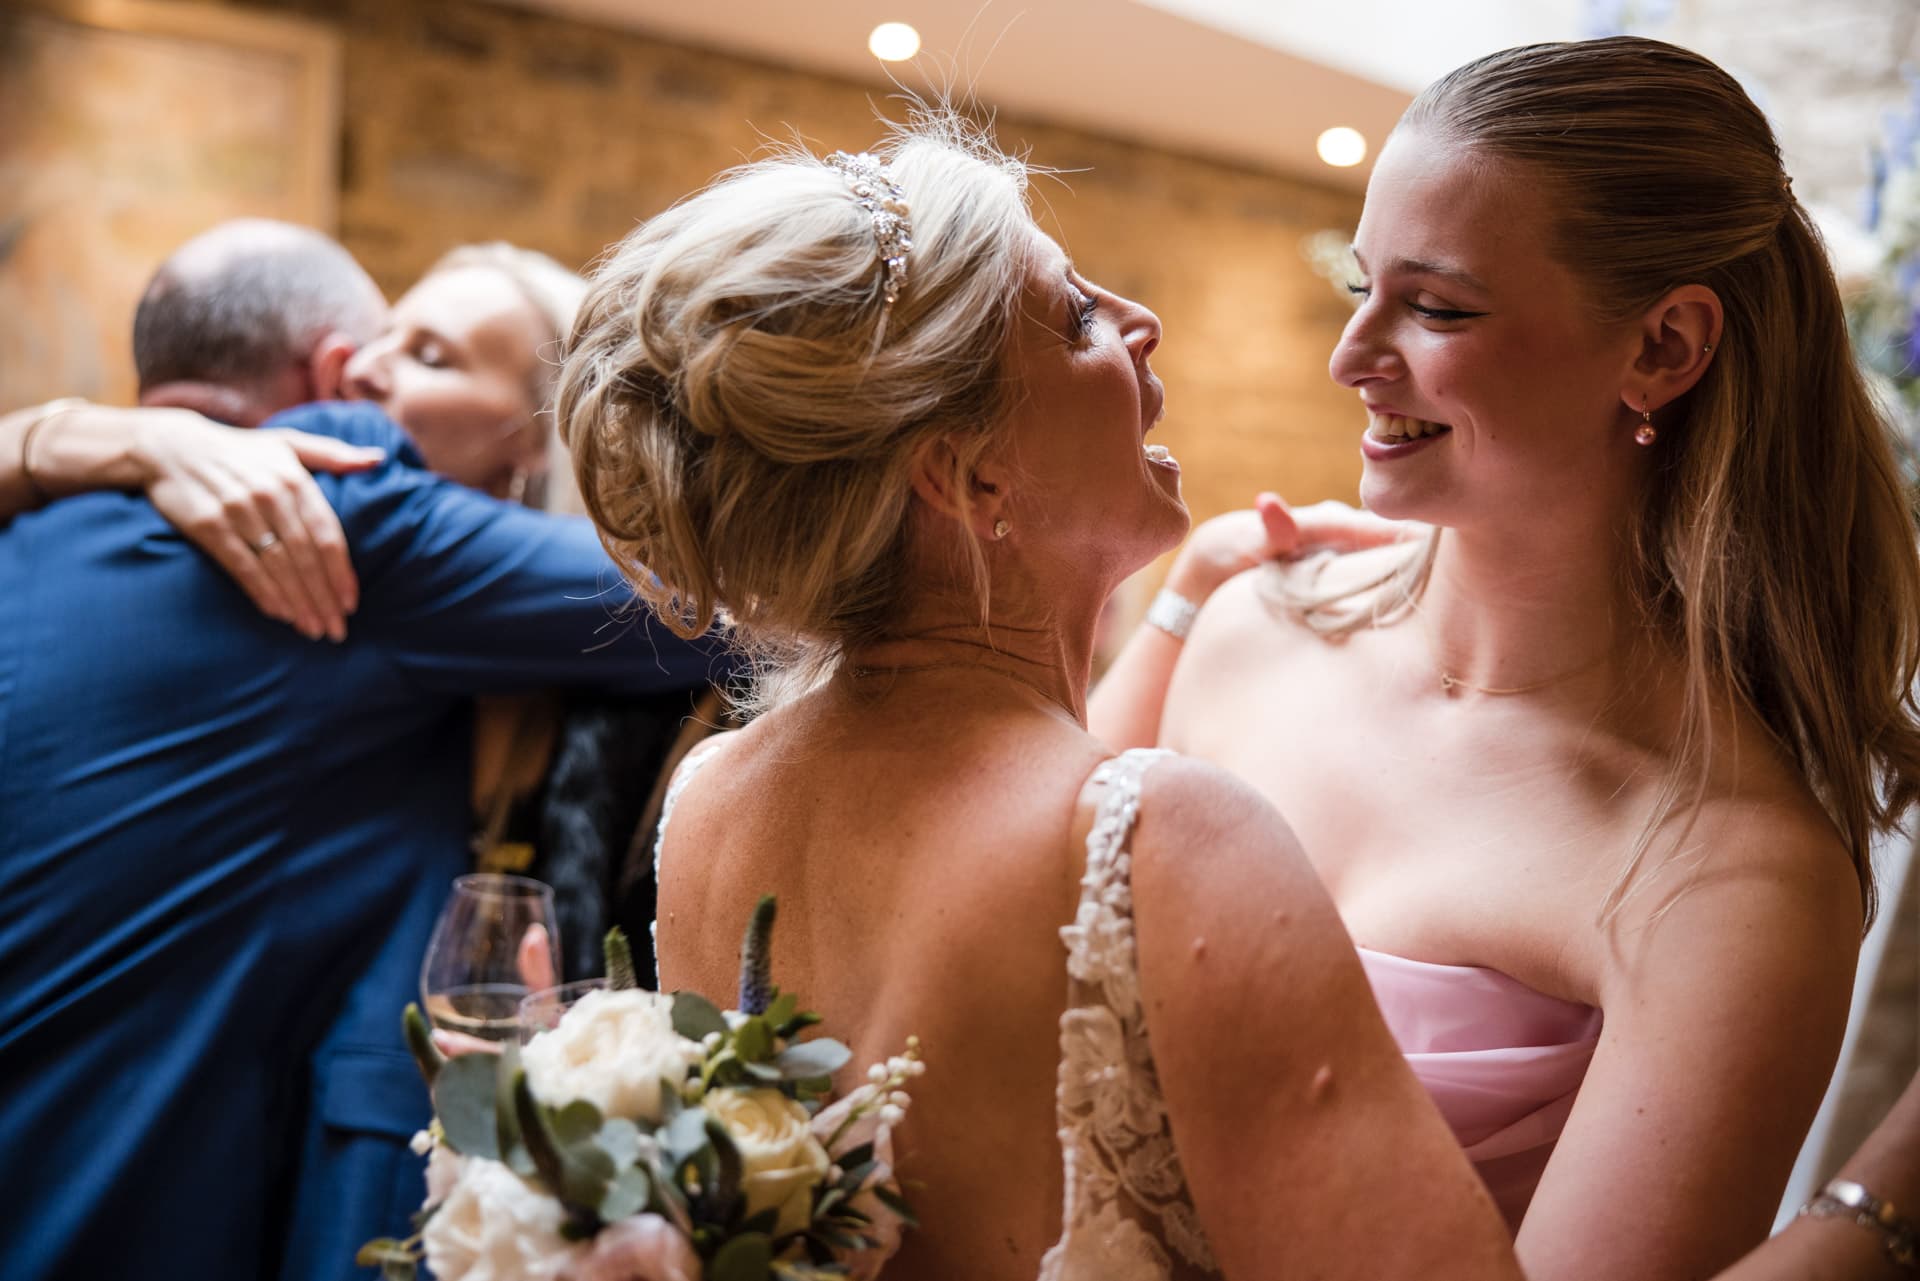 Bride and daughter hug after wedding ceremony at Le Manoir